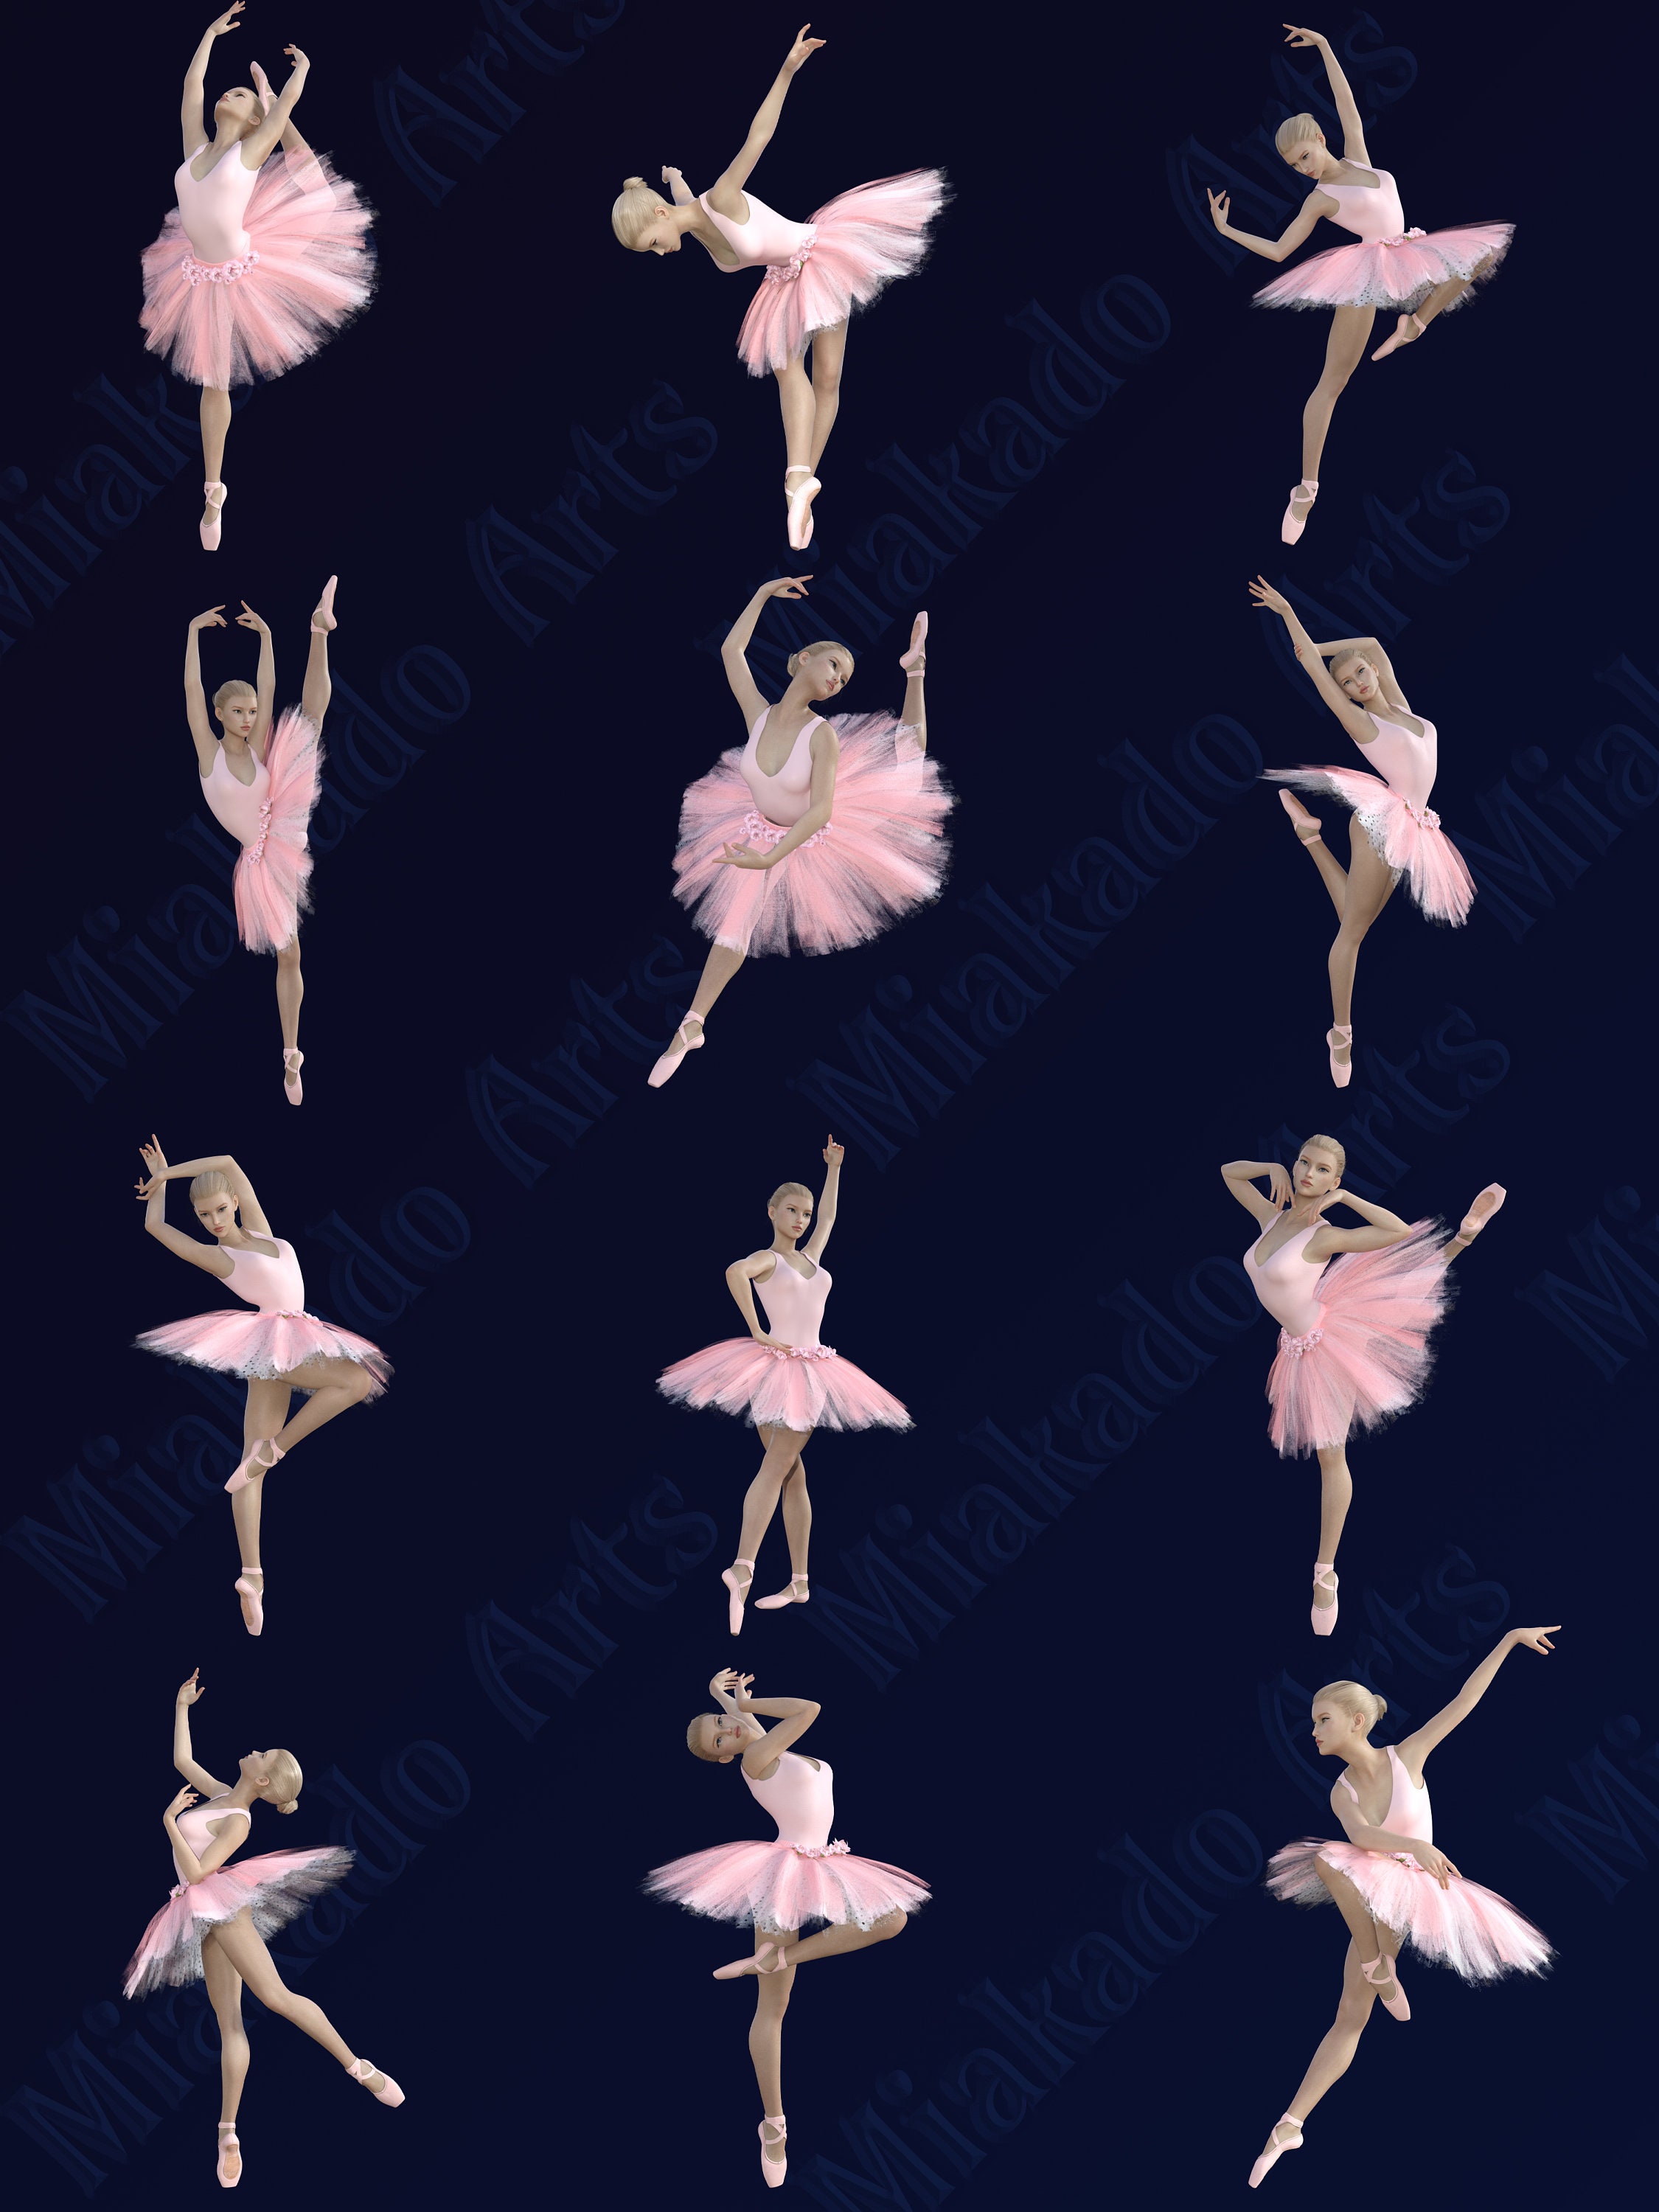 Ballet, woman and dancer with pose, exercise and training for performance  on a dark studio background. Female performer, ballerina and artist with  technique, practice routine for show and elegant art | Buy